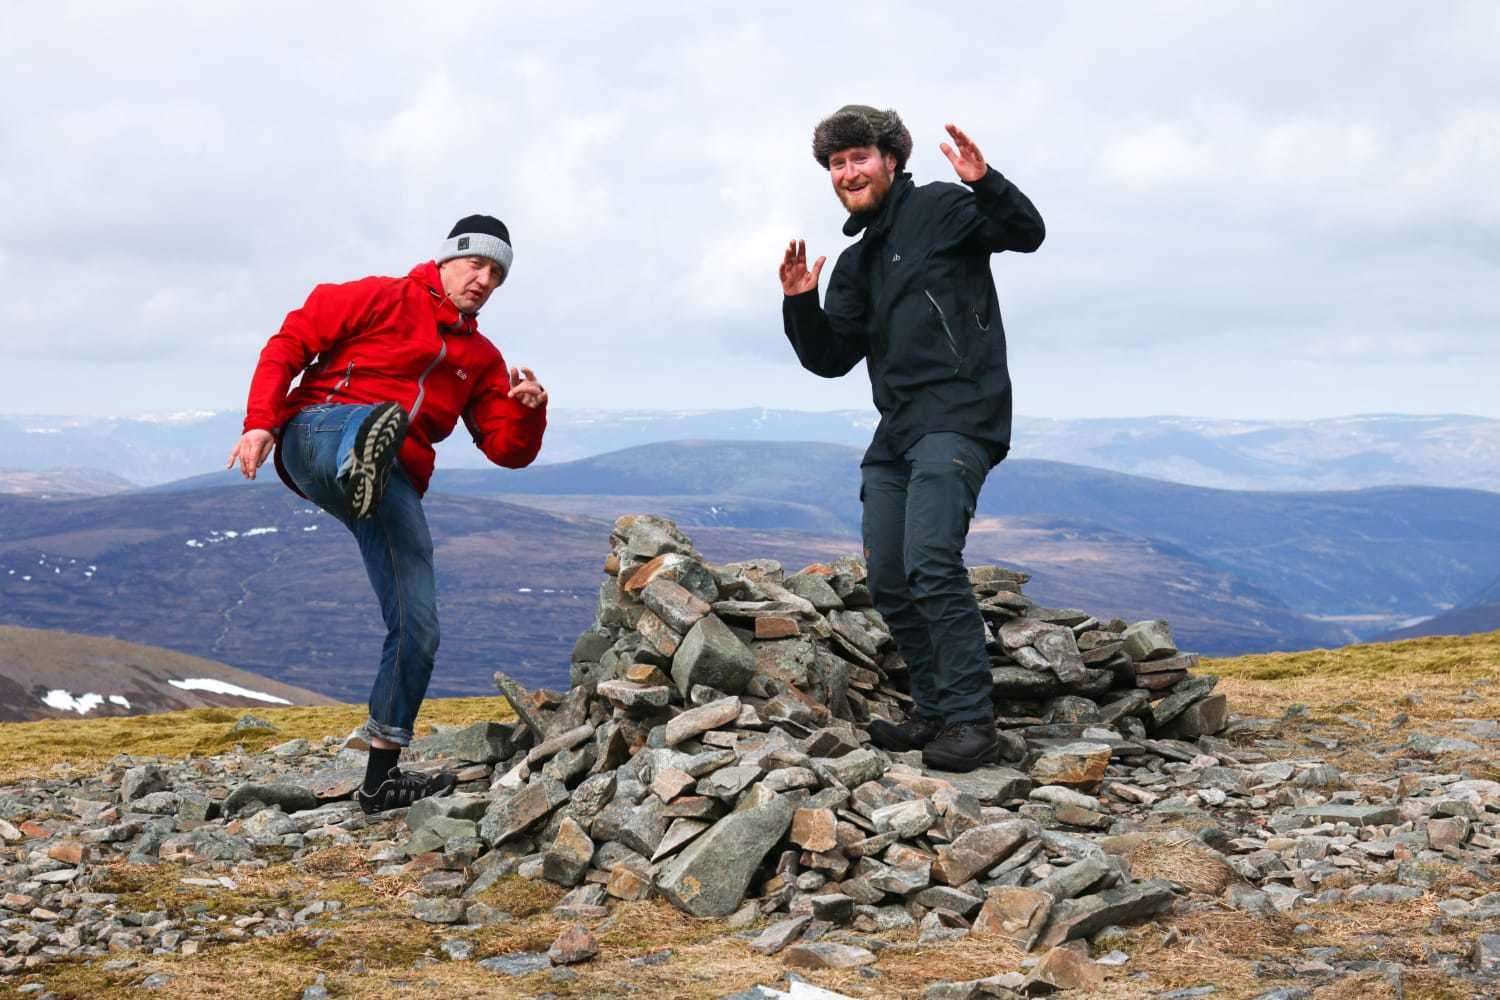 Capers at the cairn: Hector and James celebrate a summit.